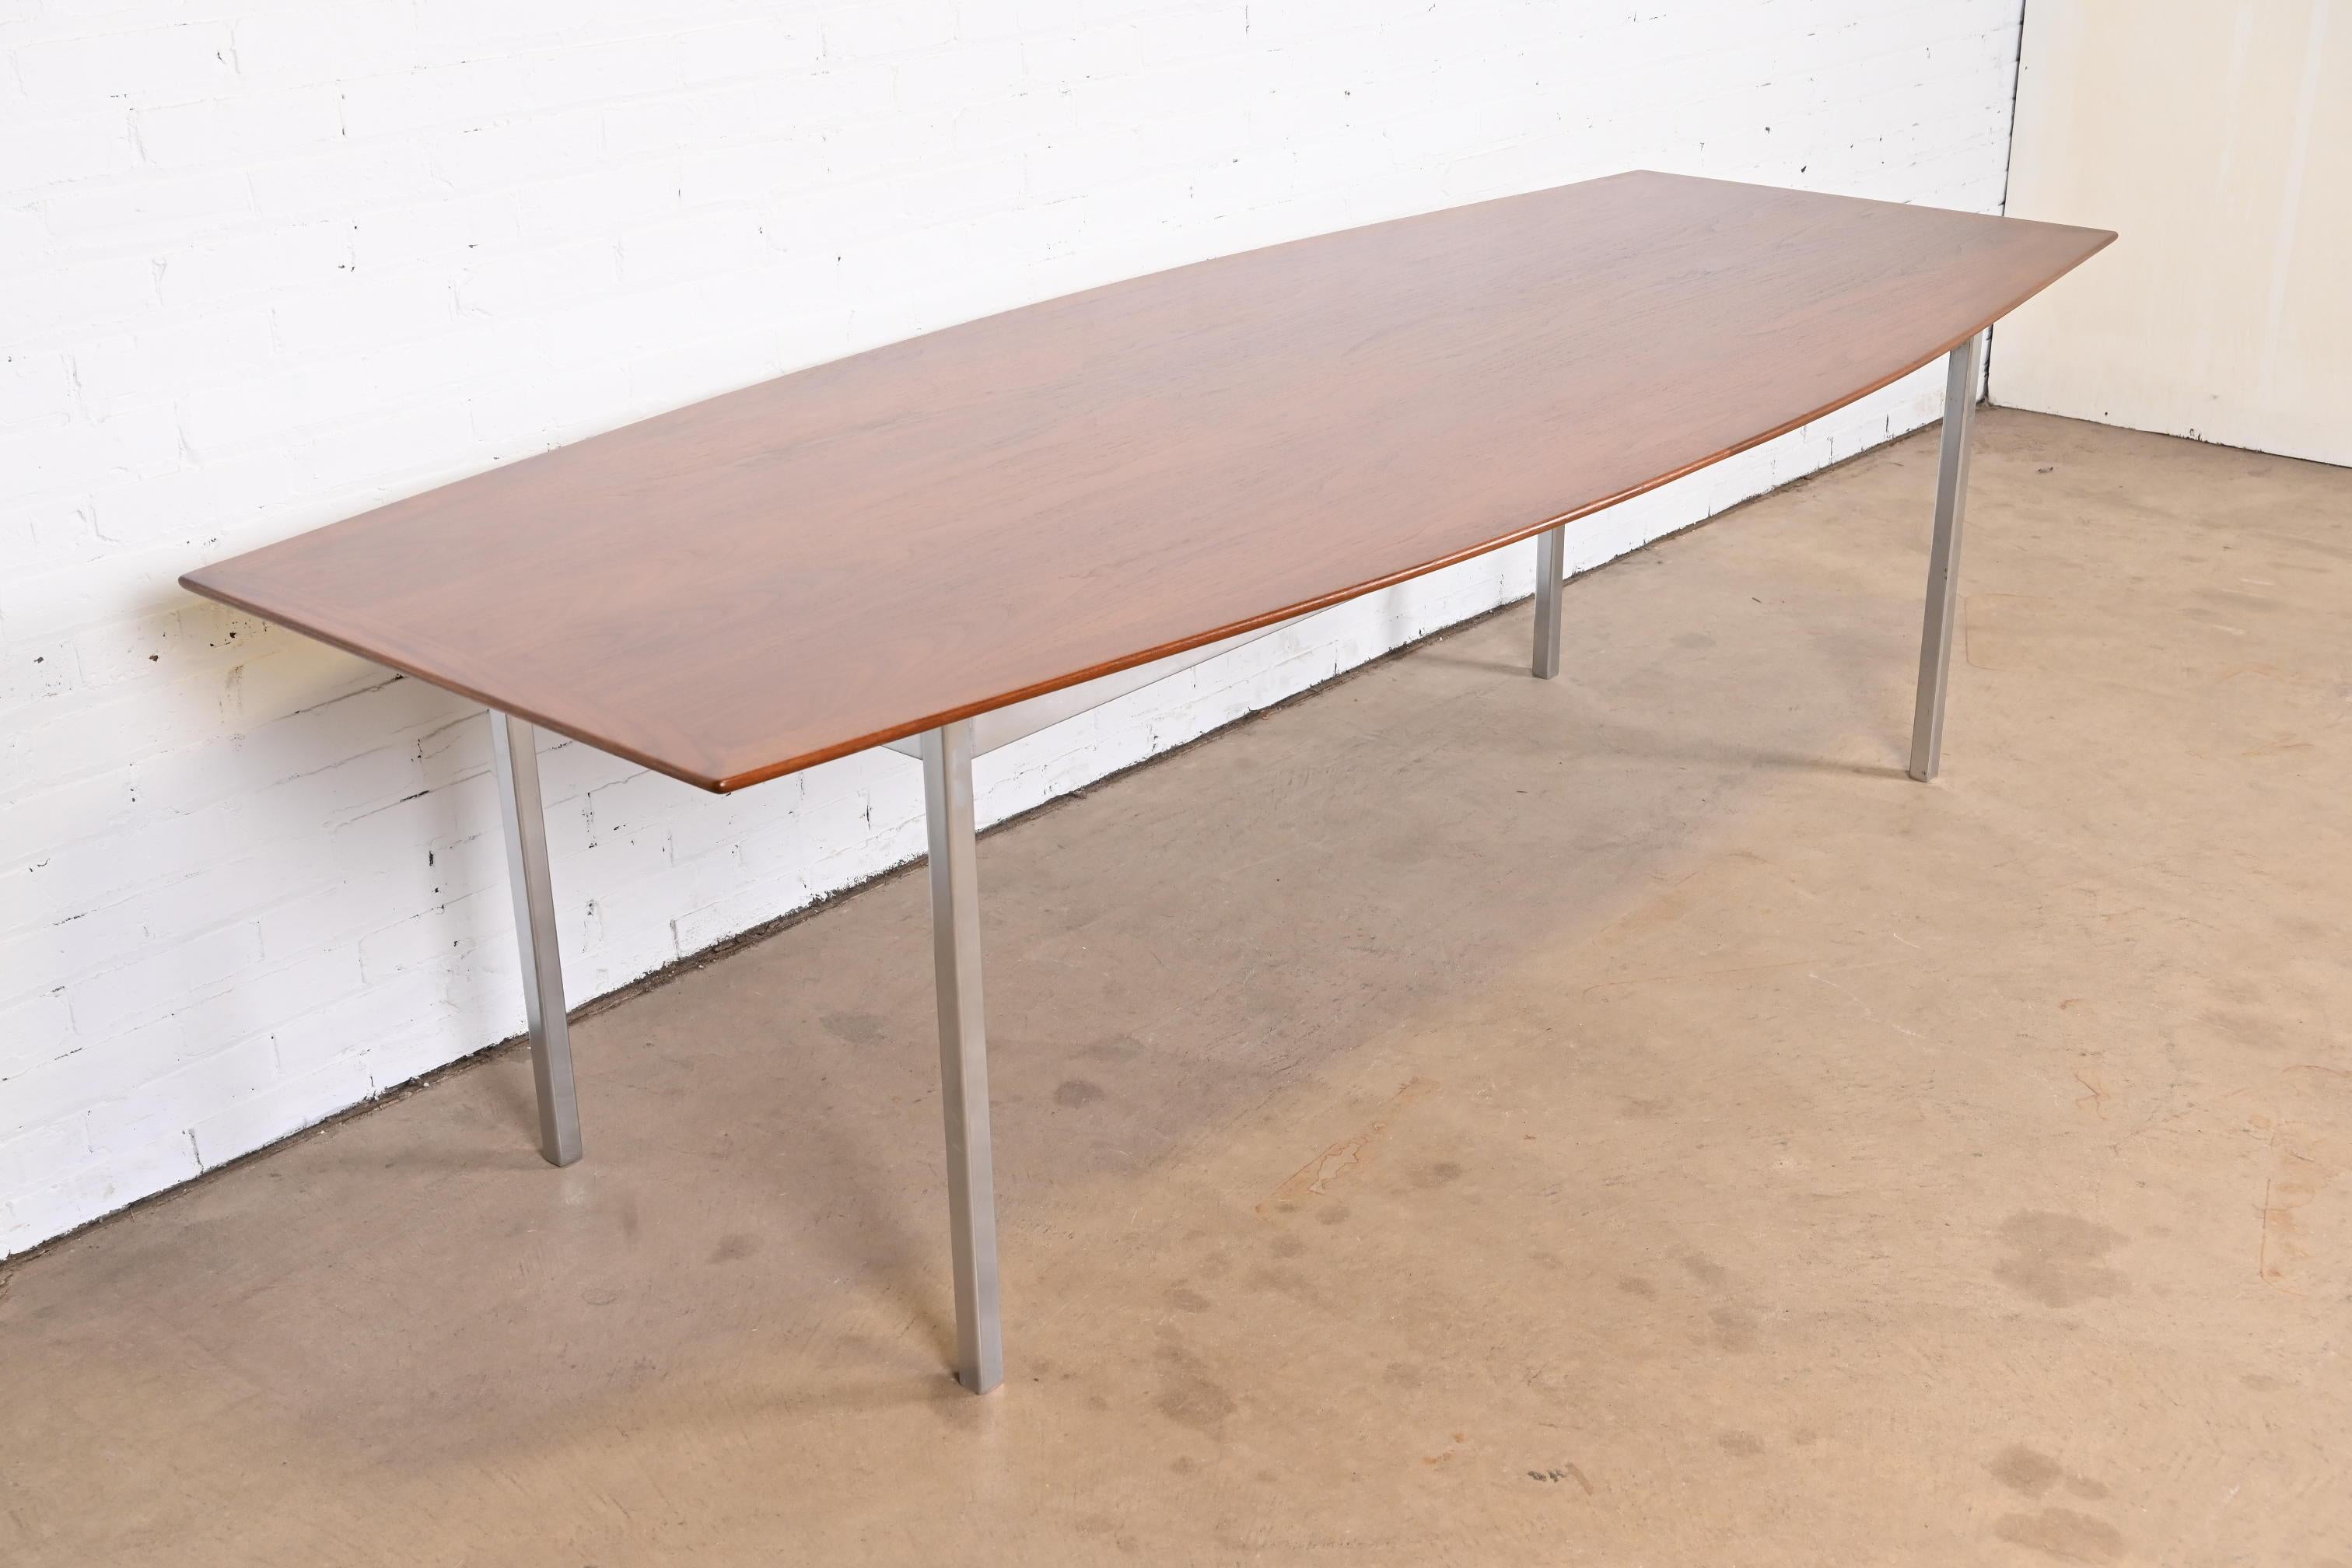 20th Century Florence Knoll Walnut Boat Shaped Conference or Dining Table, Newly Refinished